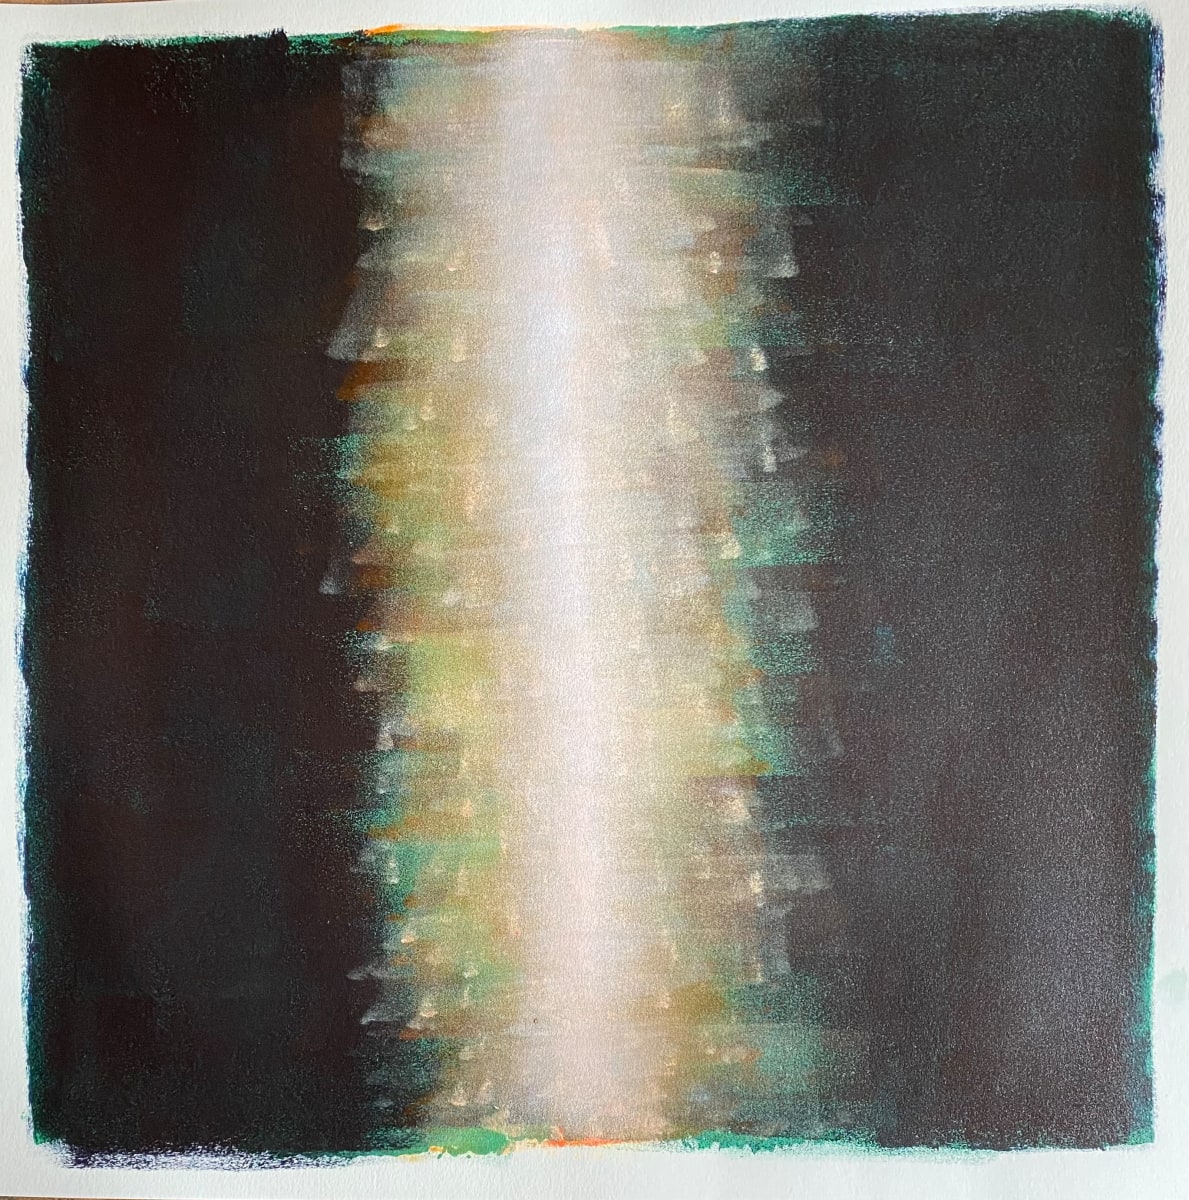 Nocturne 3 by Dean Brown  Image: 2024
Acrylic on paper 
24x24